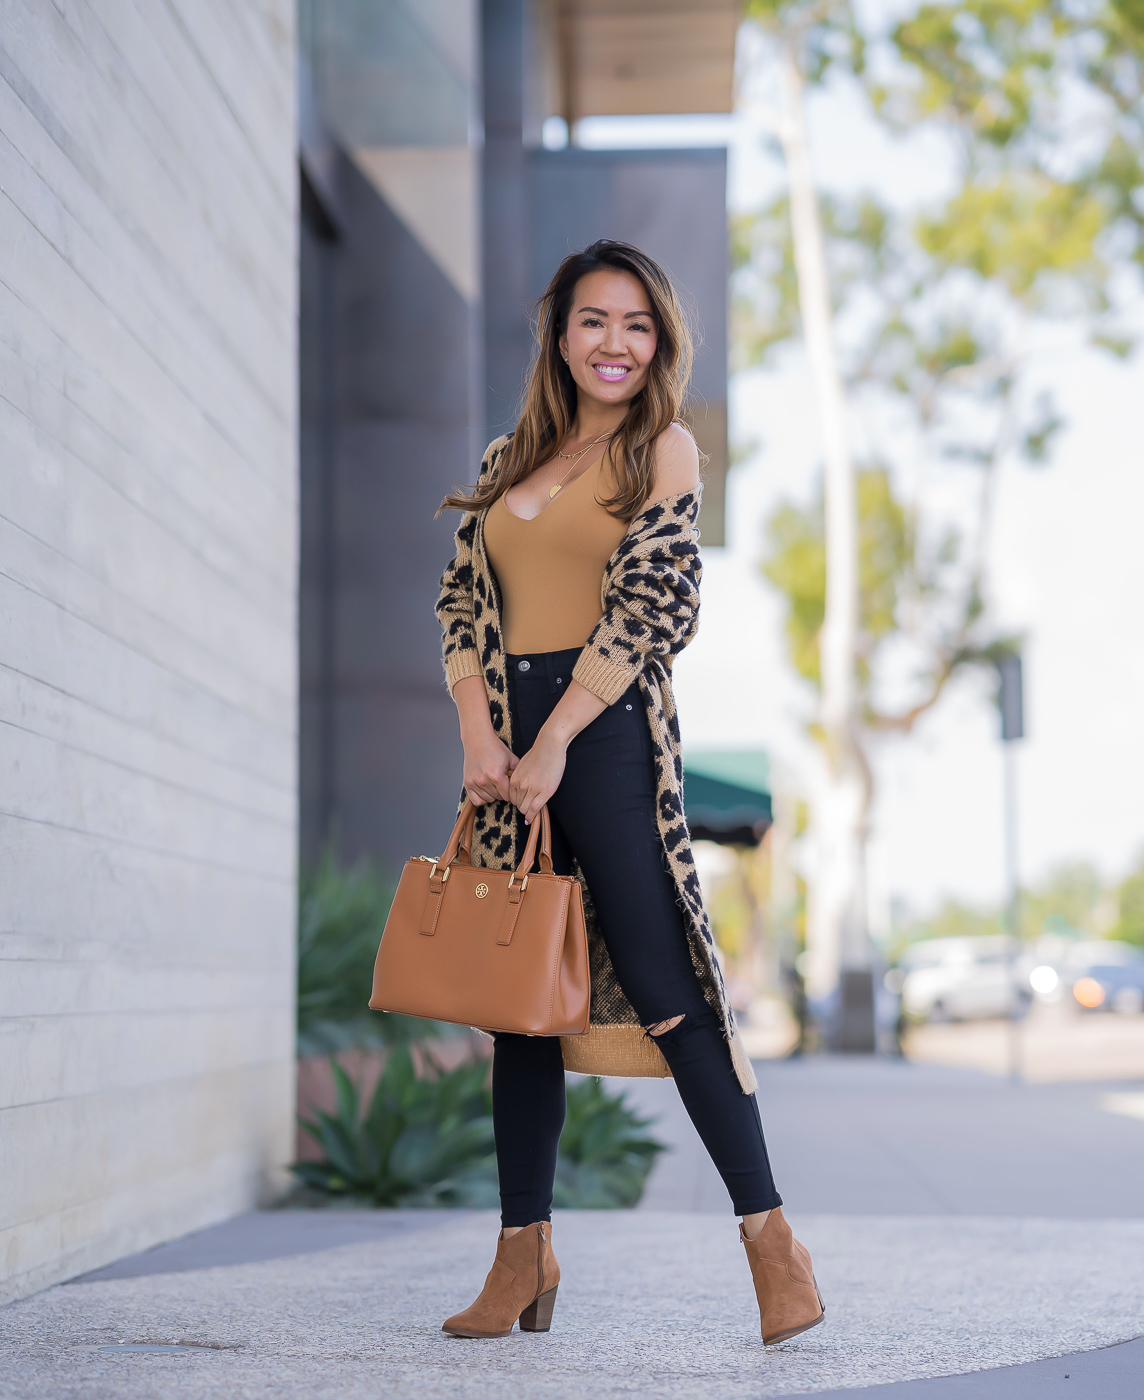 cheetah booties outfit